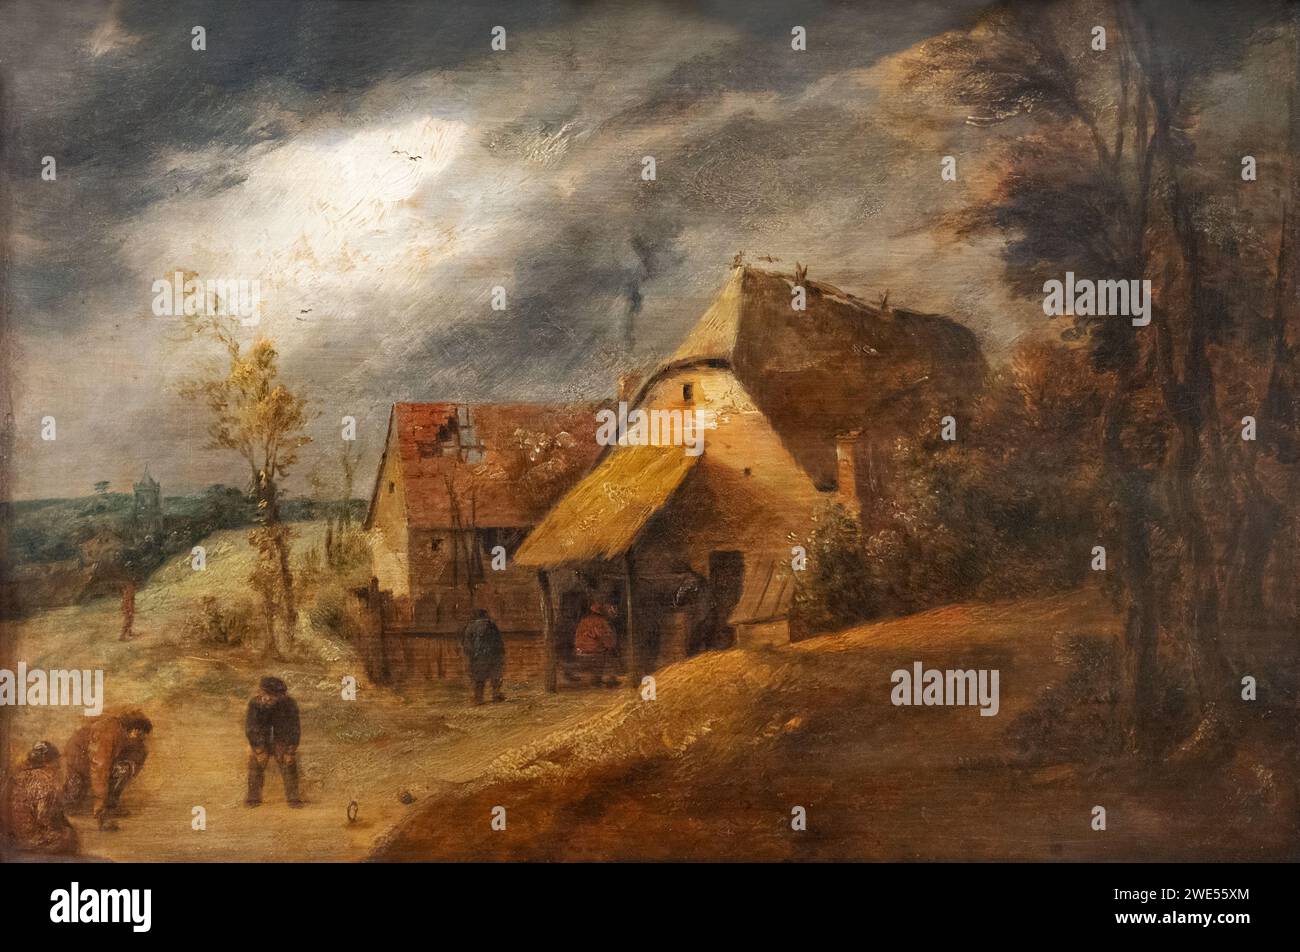 Adriaen Brouwer painting; 'Landscape with Bowlers'; c 1632-8; Oil on panel; 17th century Flemish painter Stock Photo